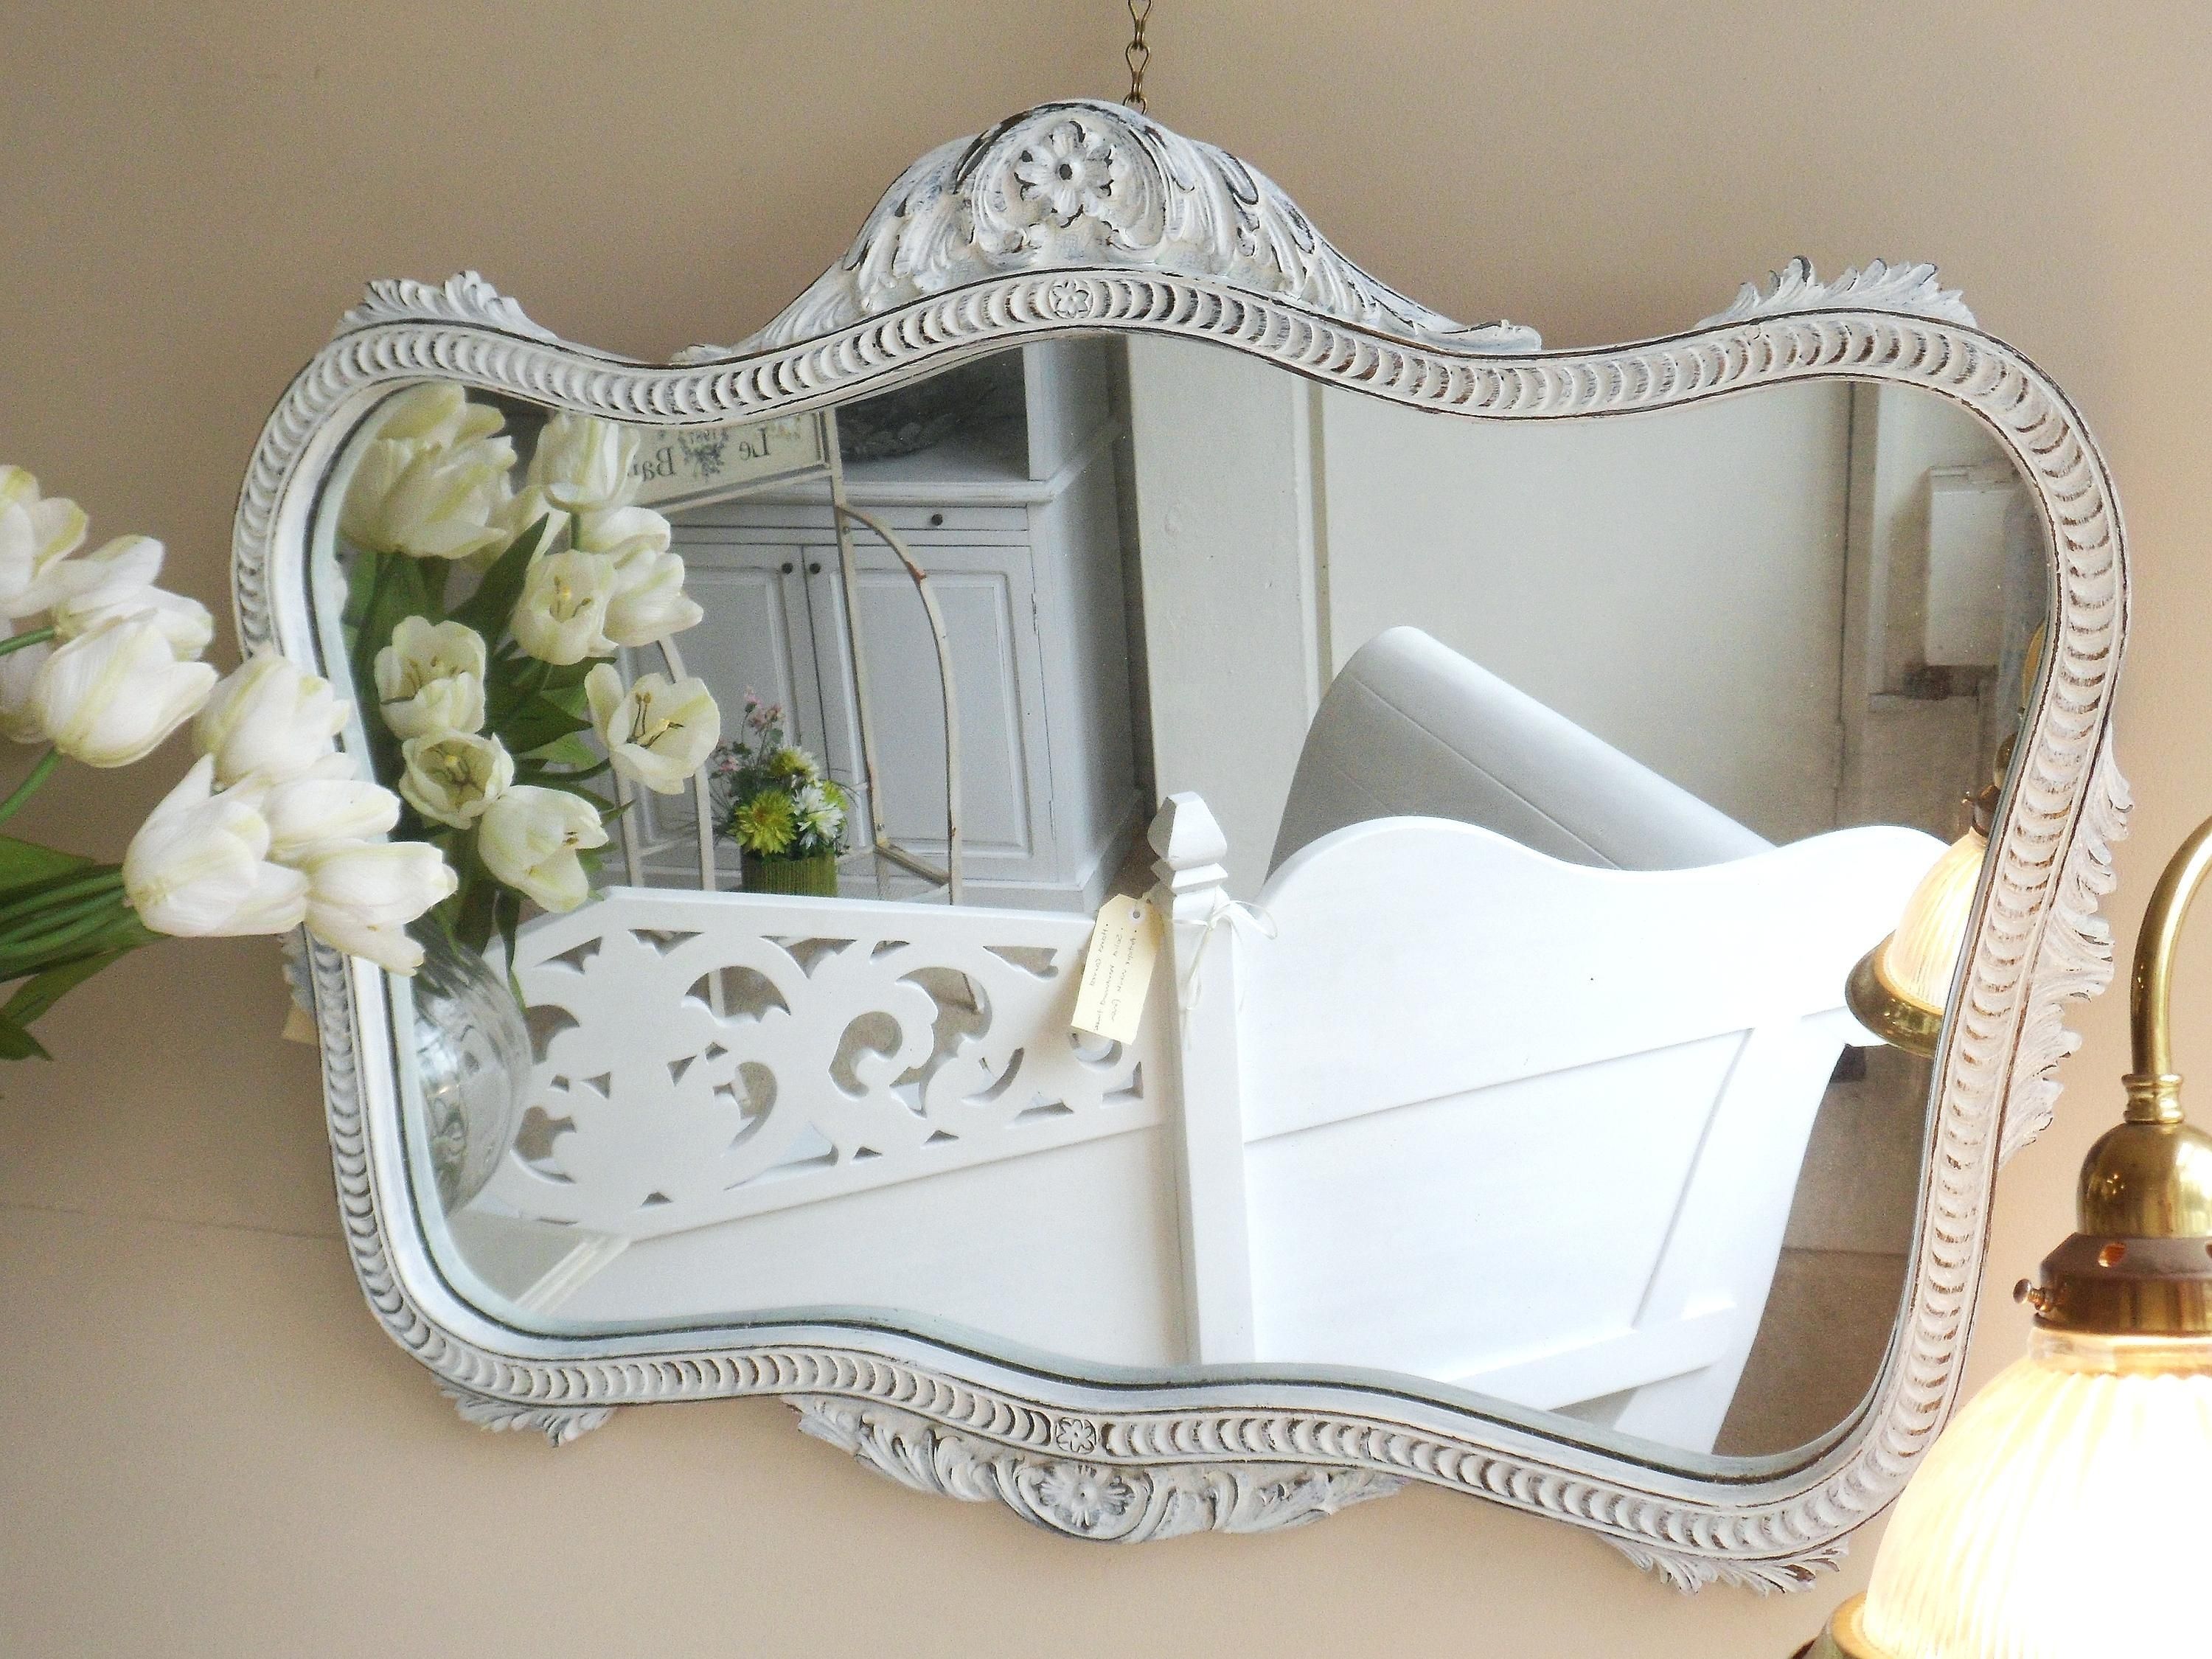 Large White Antique Design Ornate Dress Wall Mirror 49 X 16White With Regard To White Antique Mirrors (View 3 of 20)